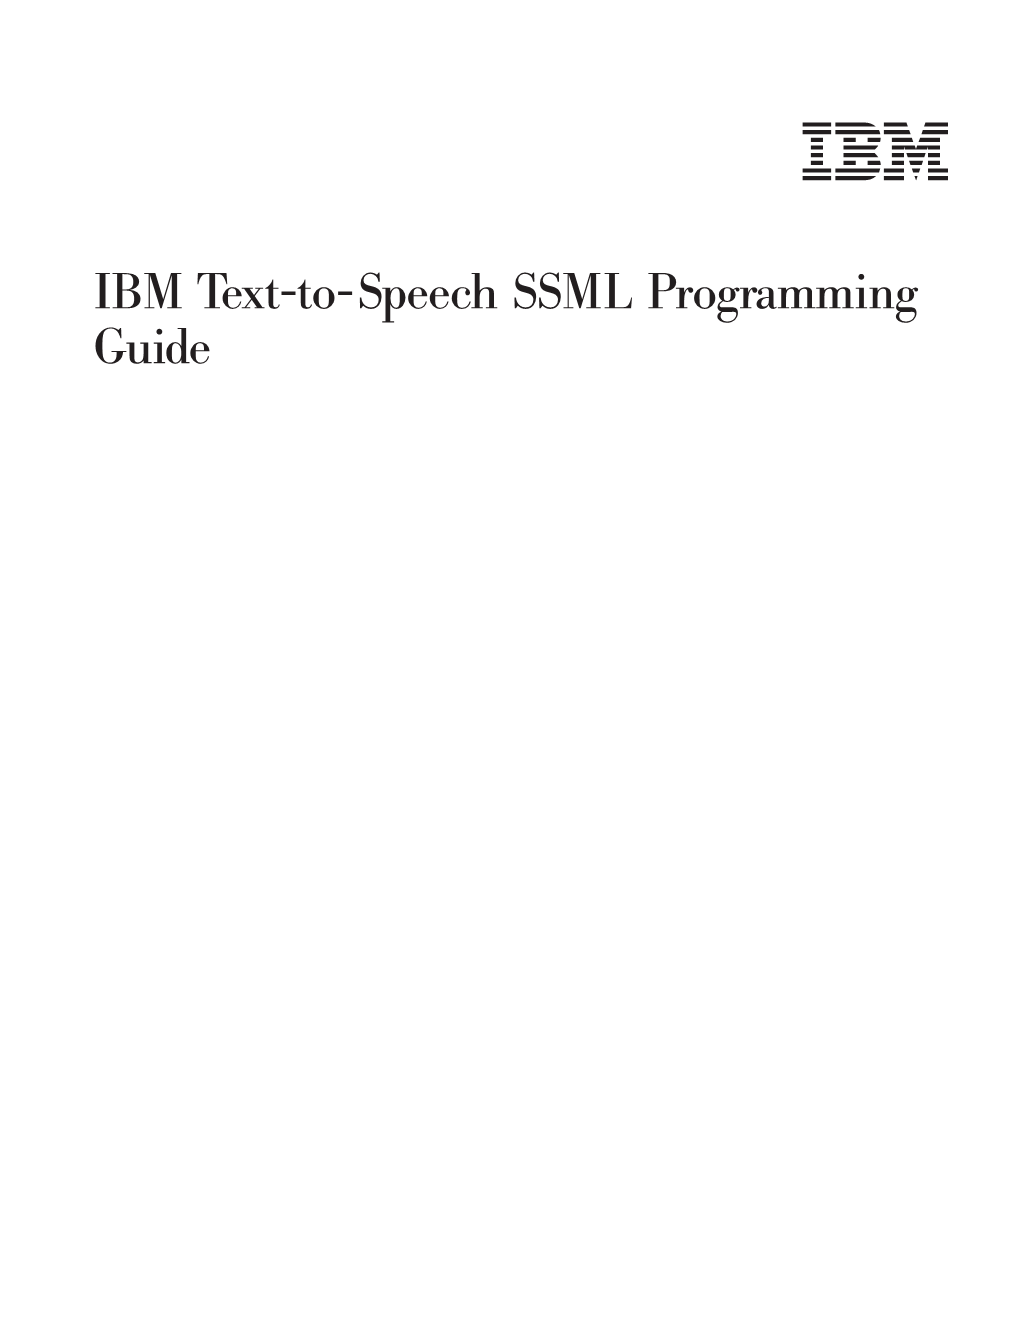 IBM Text-To-Speech SSML Programming Guide December 2008 a Form for Readers’ Comments Appears at the Back of This Publication